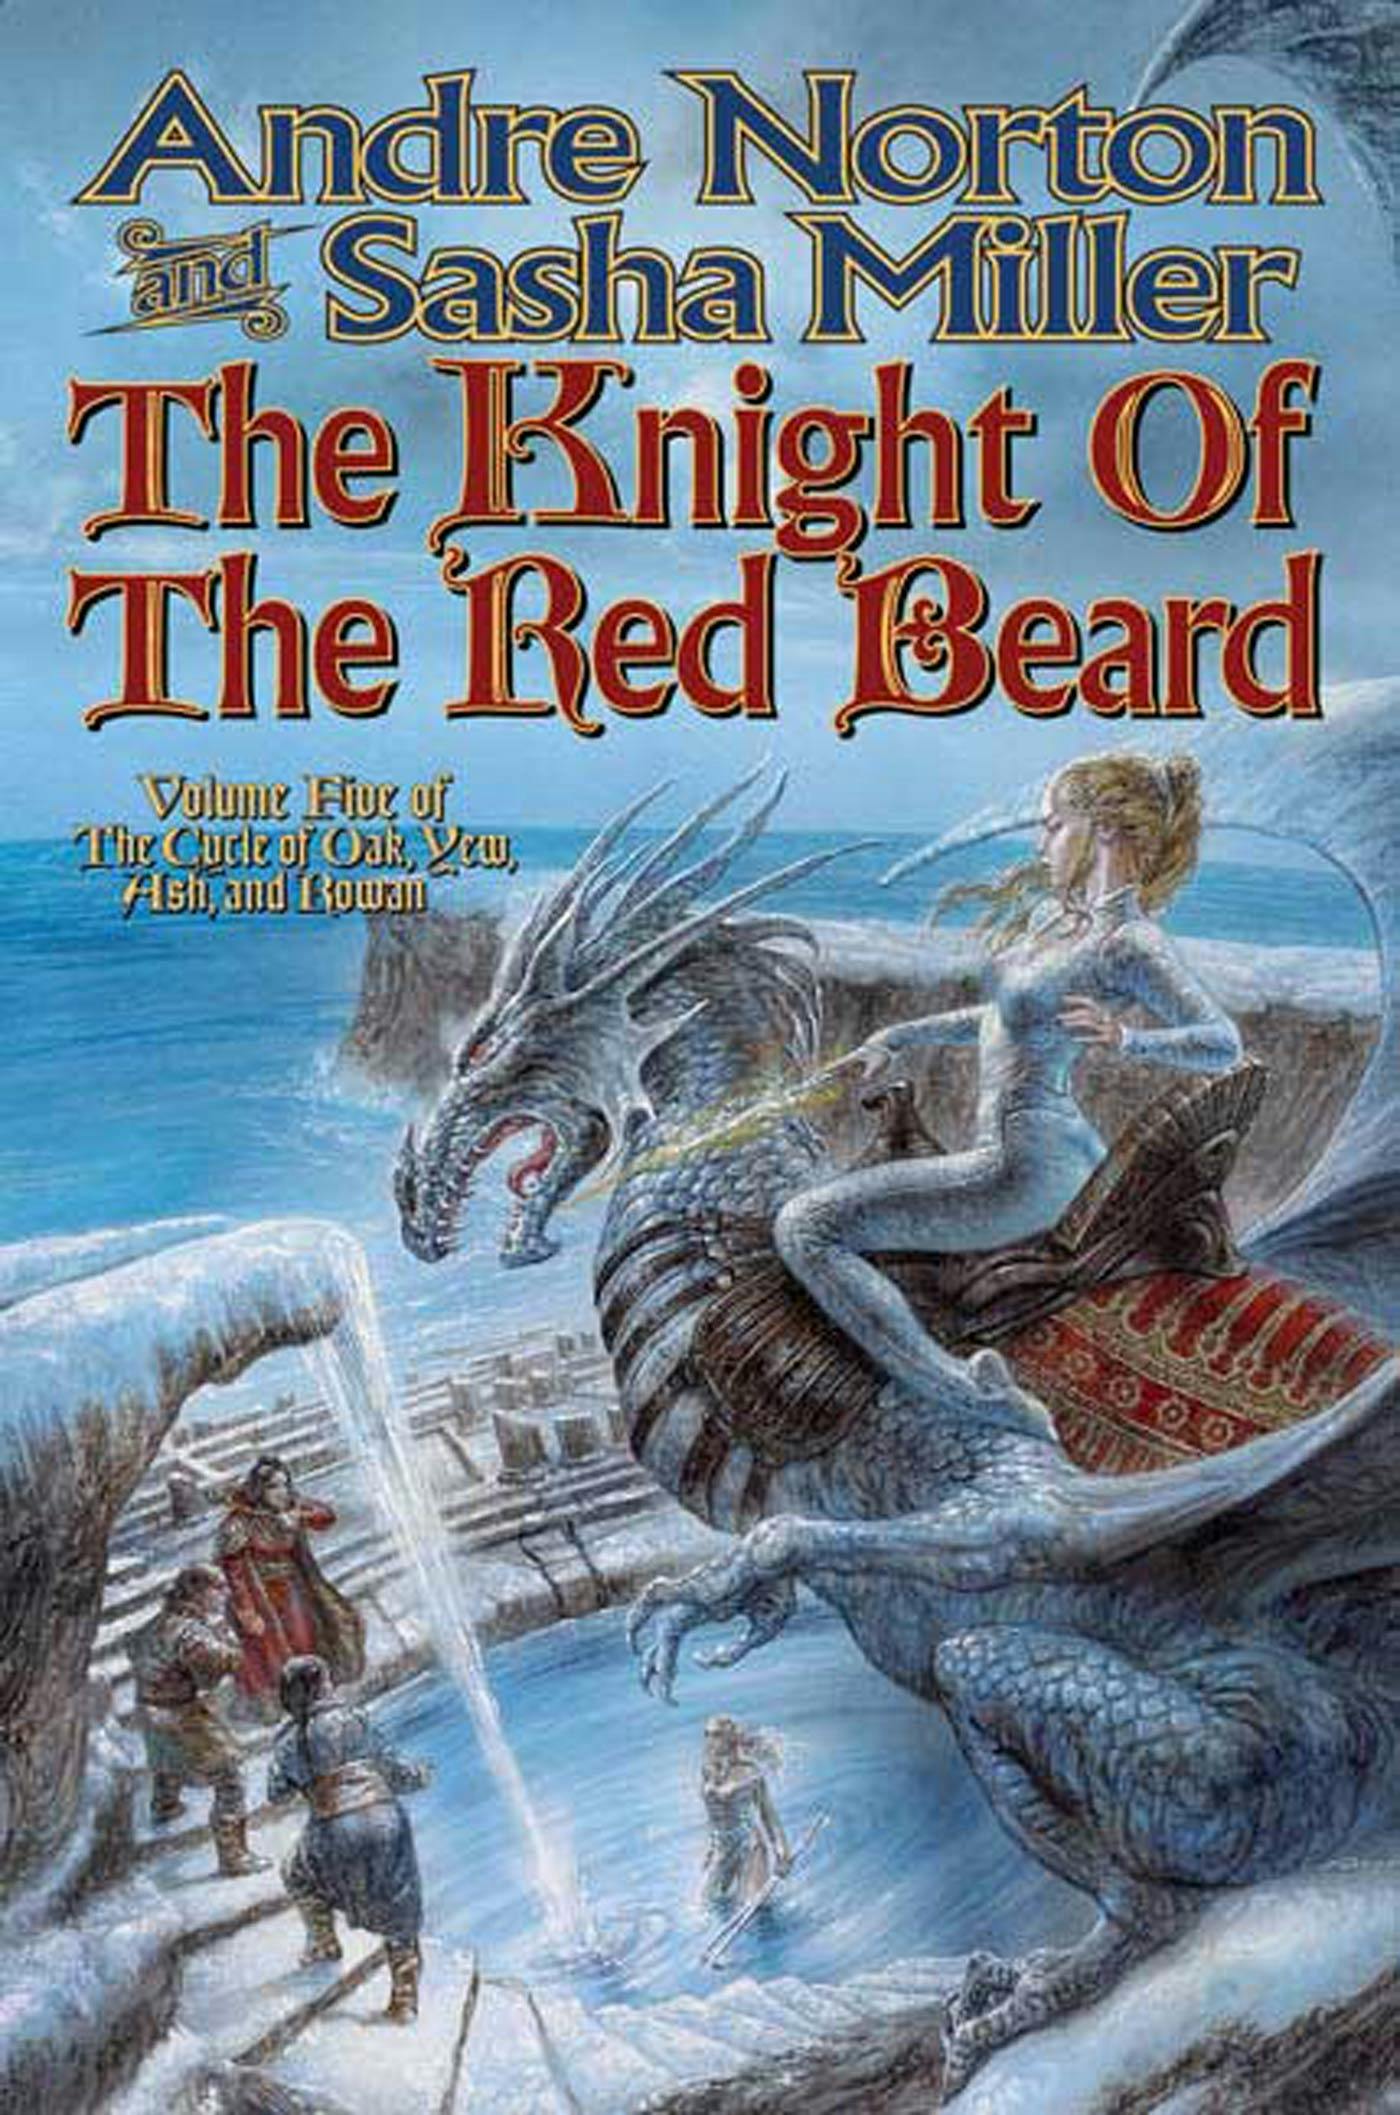 Cover for the book titled as: The Knight of the Red Beard